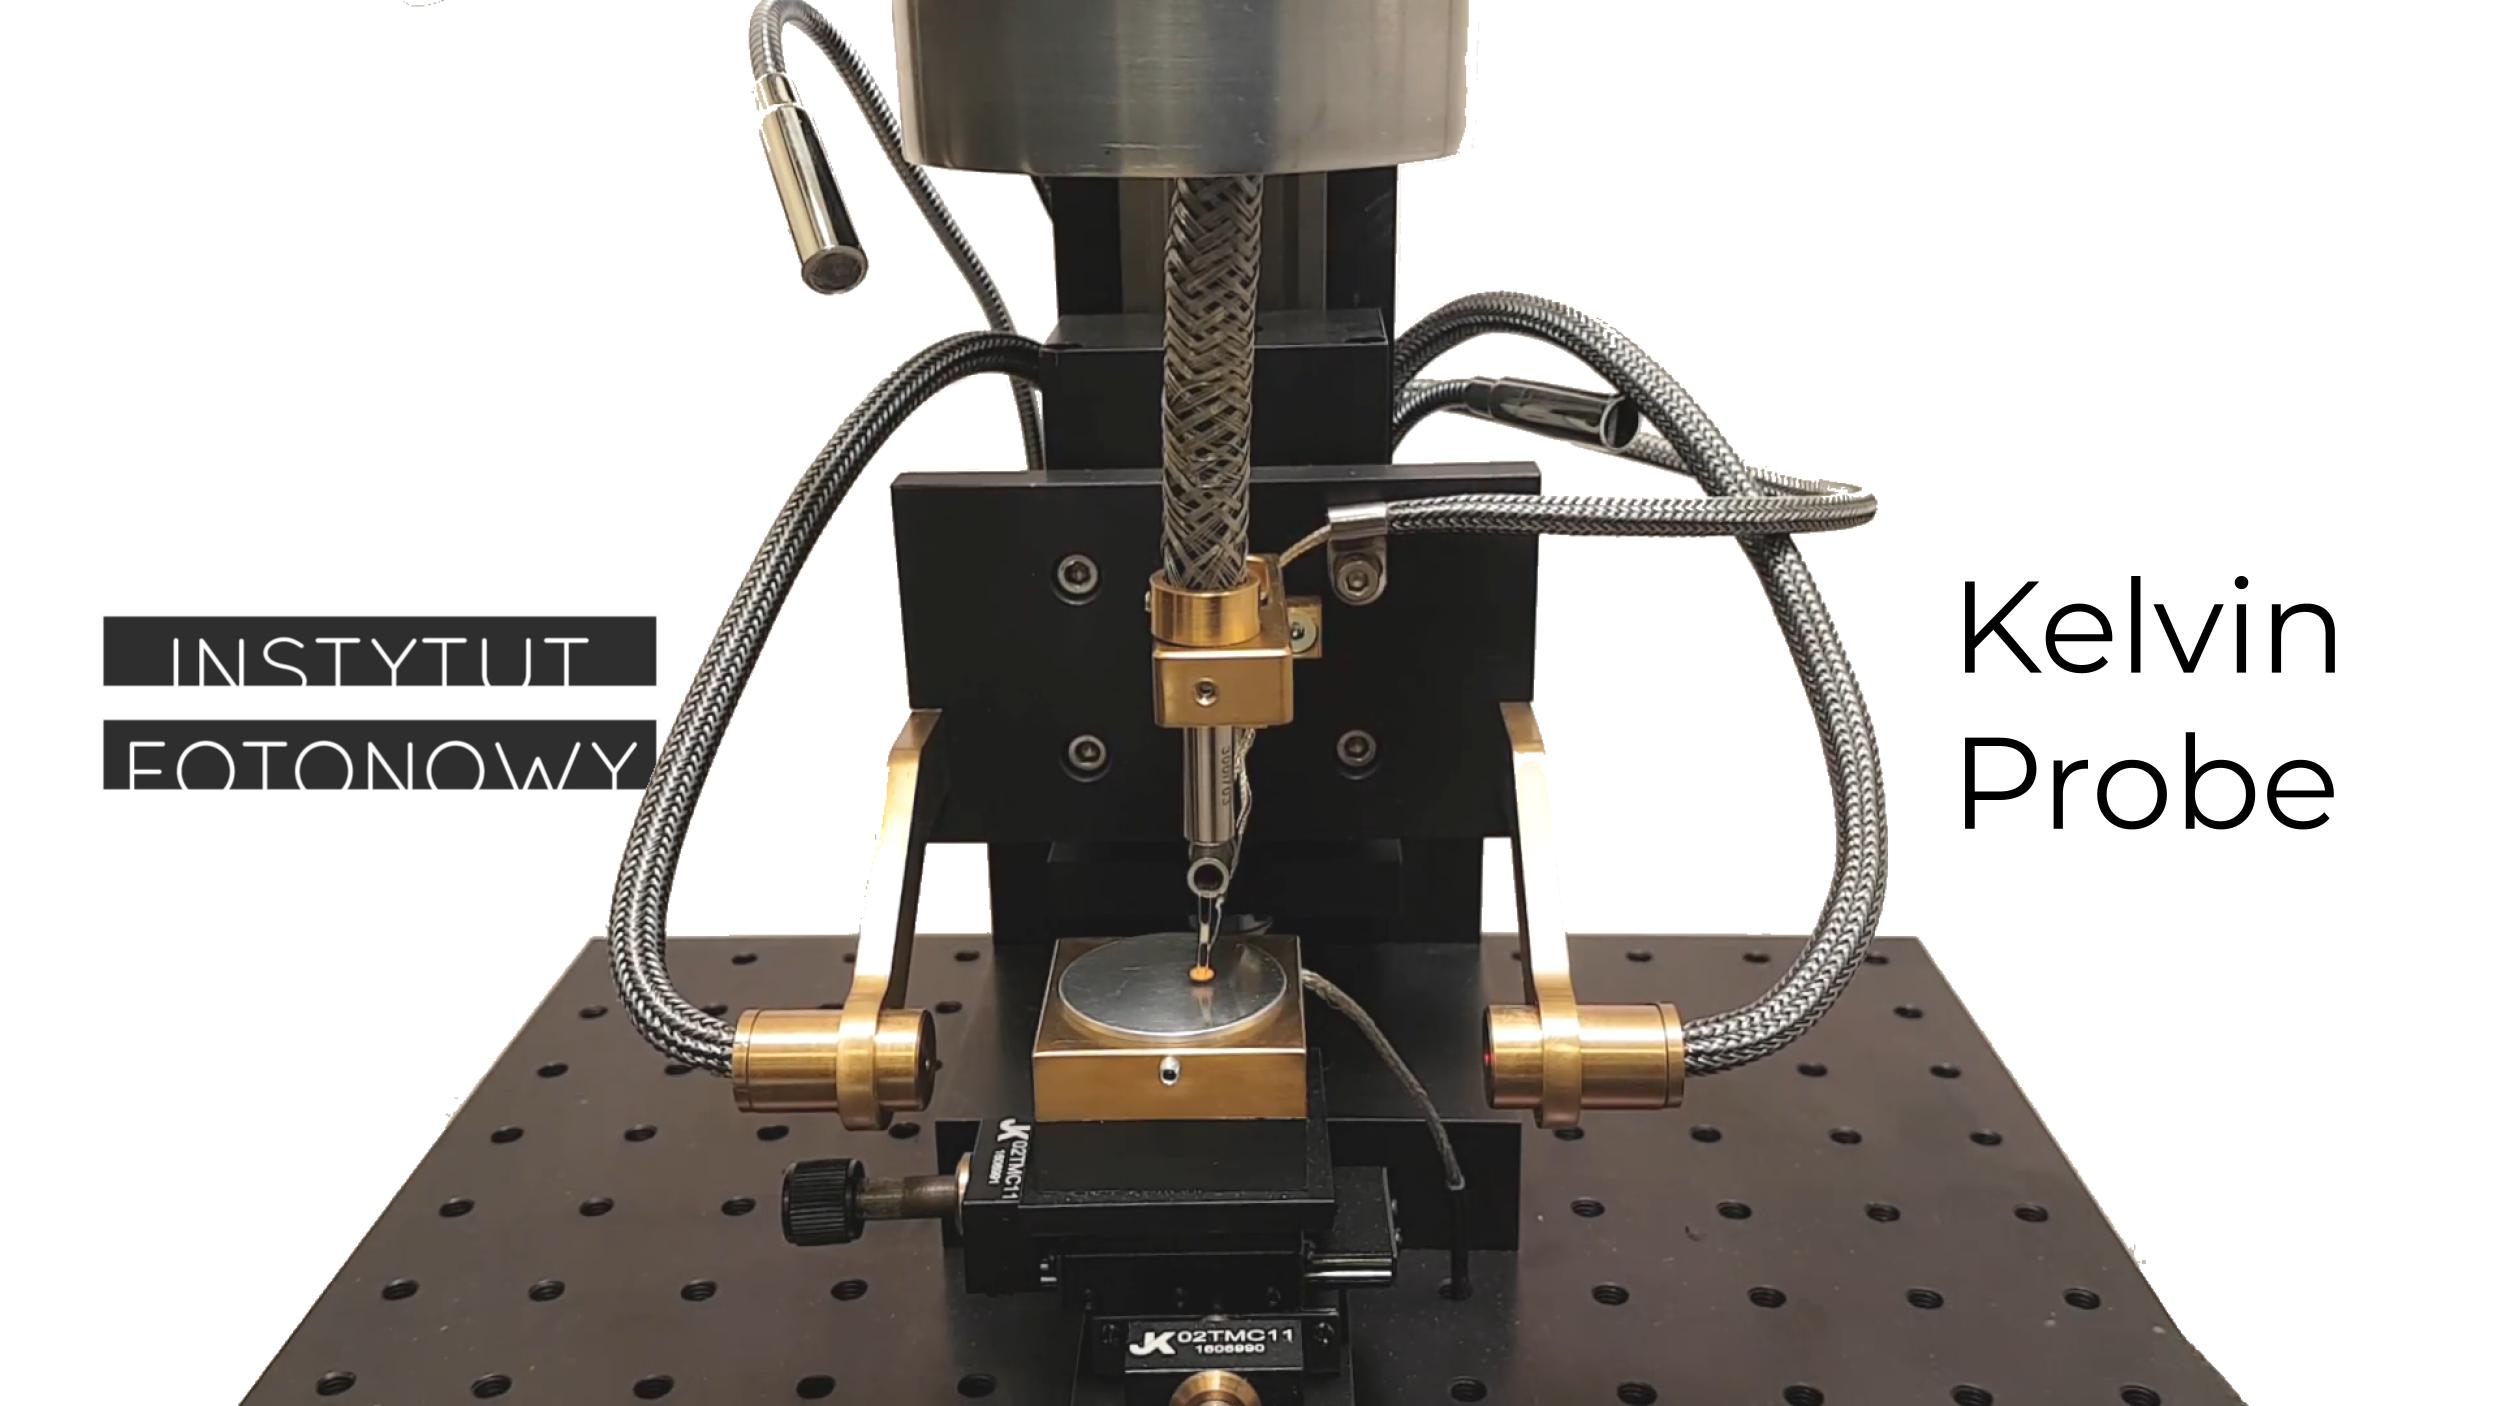 Scanning Kelvin Probe - for precise Contact Potential Difference measurements and charge distribution over the sample surface.